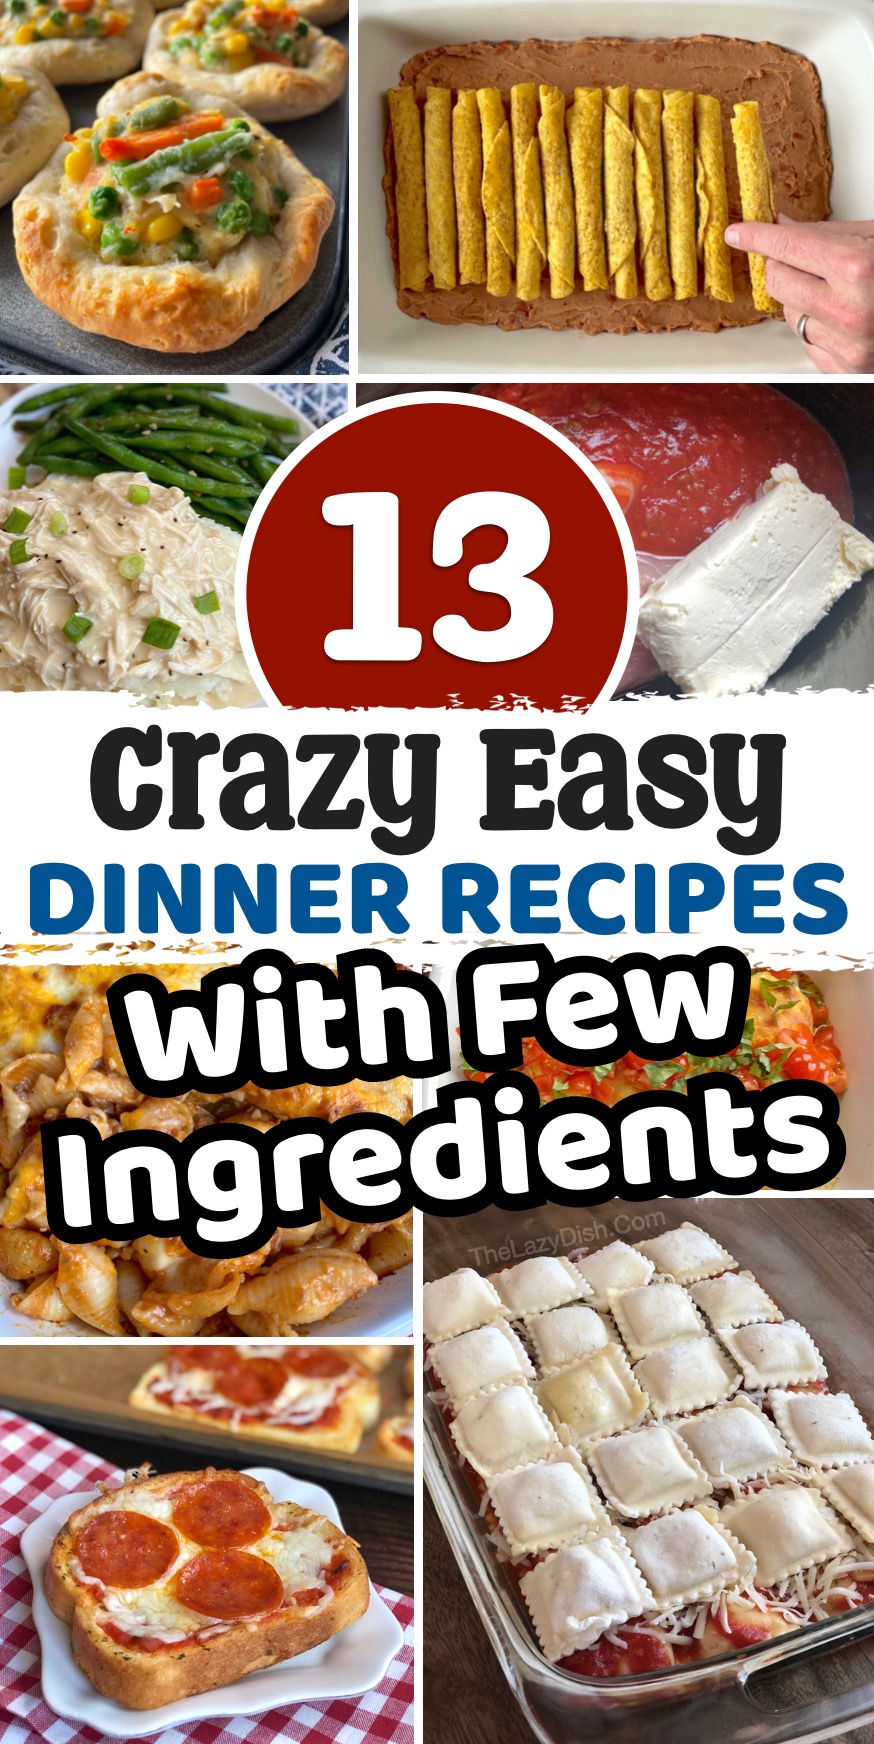 Are you hungry but tired and not a fan of being in the kitchen all night cooking and cleaning? Here are some quick and easy meals to make at home that are completely effortless to make with just a few cheap and common ingredients!  I've rounded up 13 of my favorite lazy day dinners that are kid approved and quick to prepare in less than 30 minutes. 